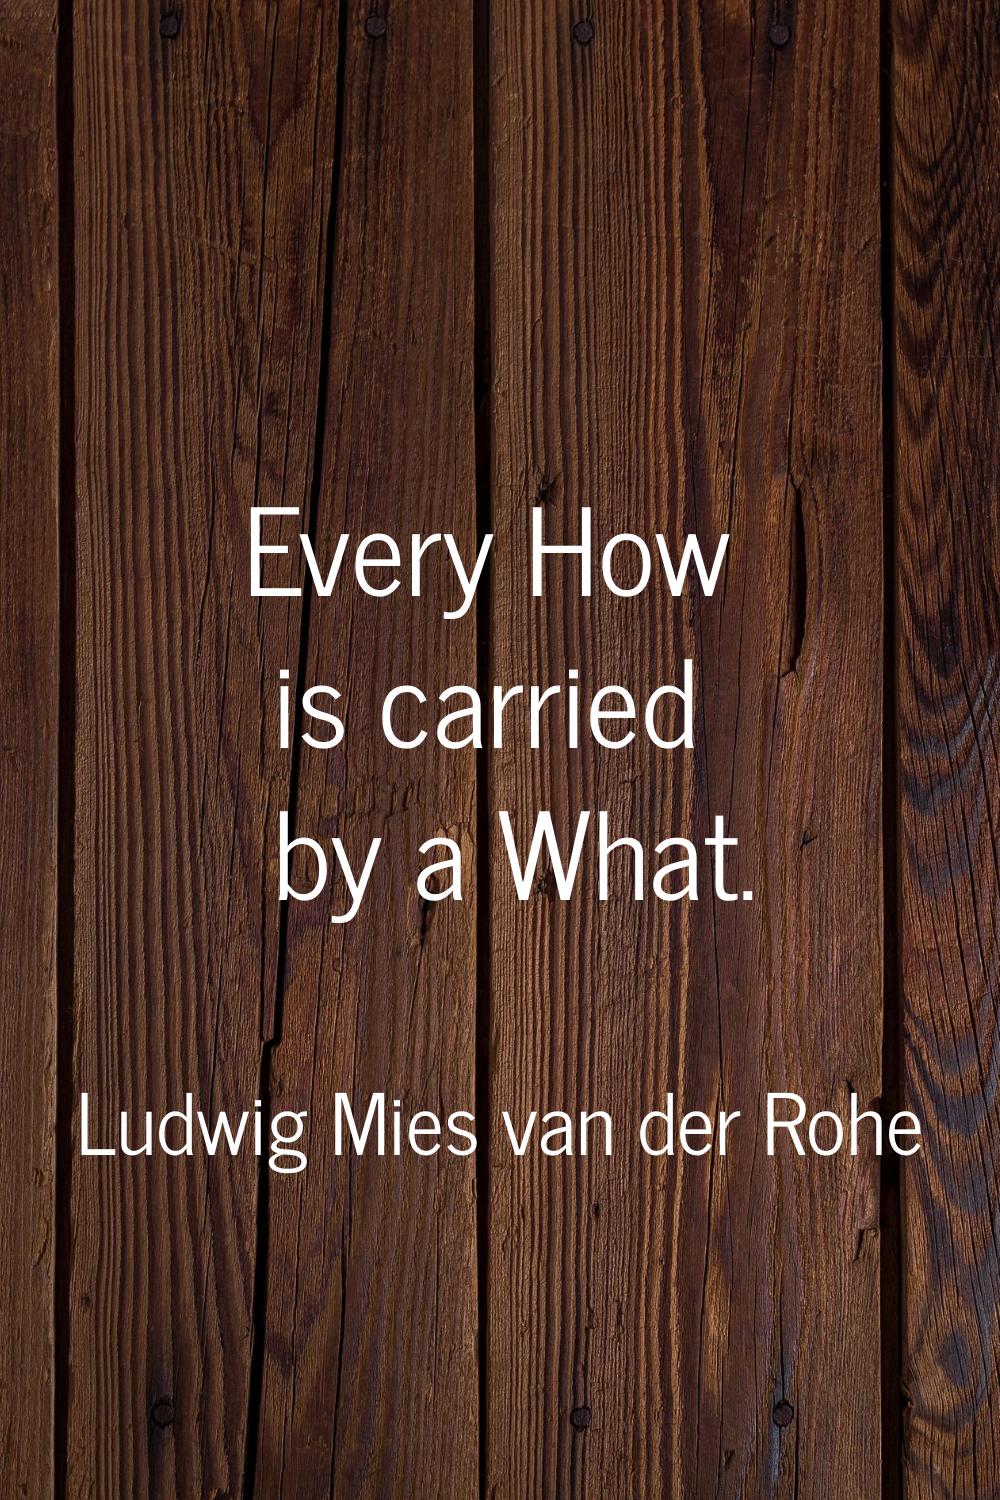 Every How is carried by a What.